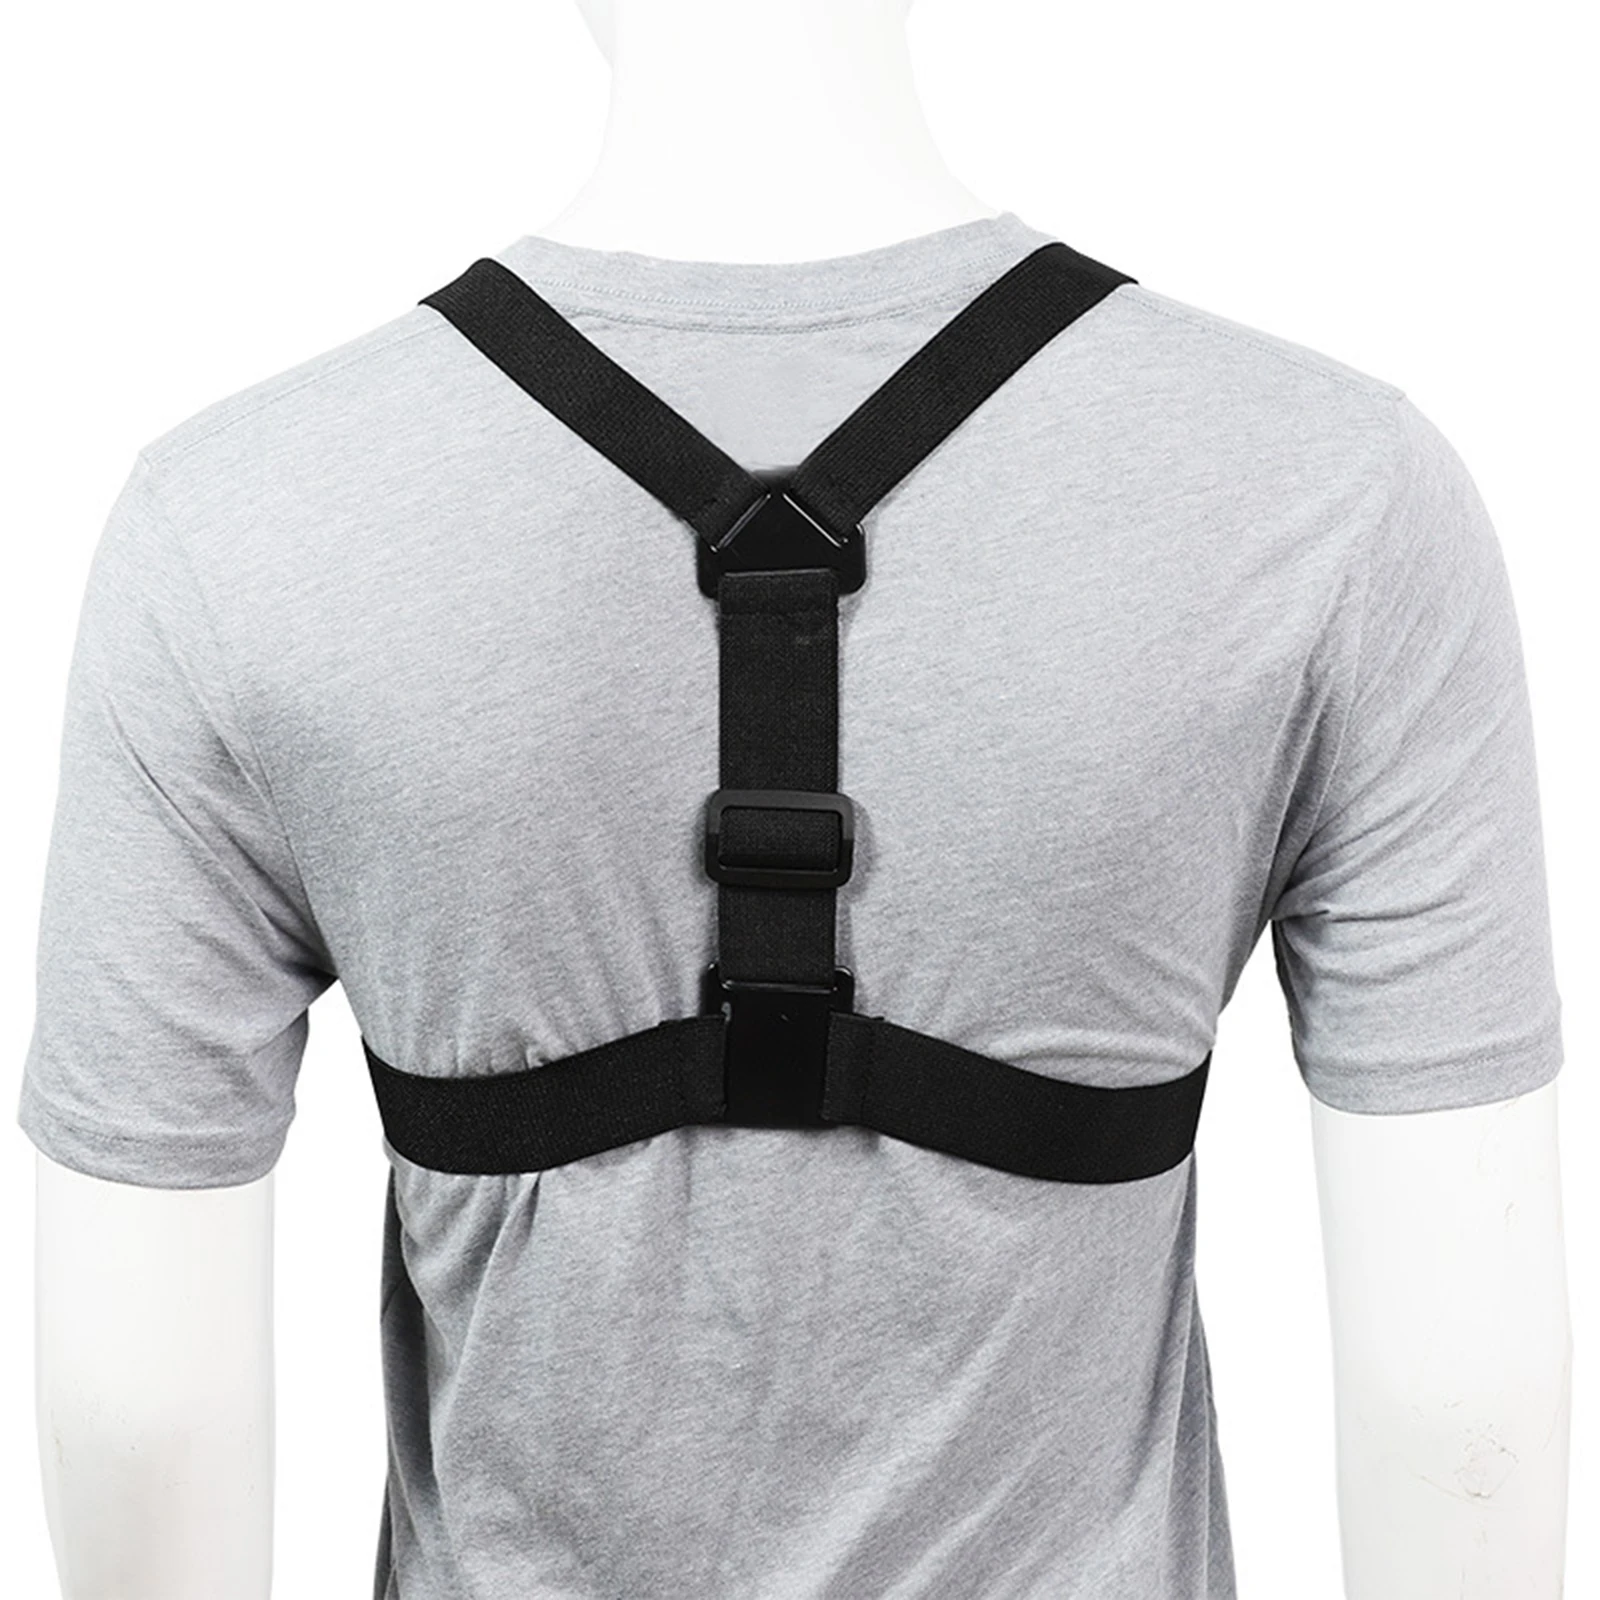 

Universal Chest Mount Harness for Walking Smartphone for Travel on Foot Fully Adjustable Chest Strap Includes J-Hook